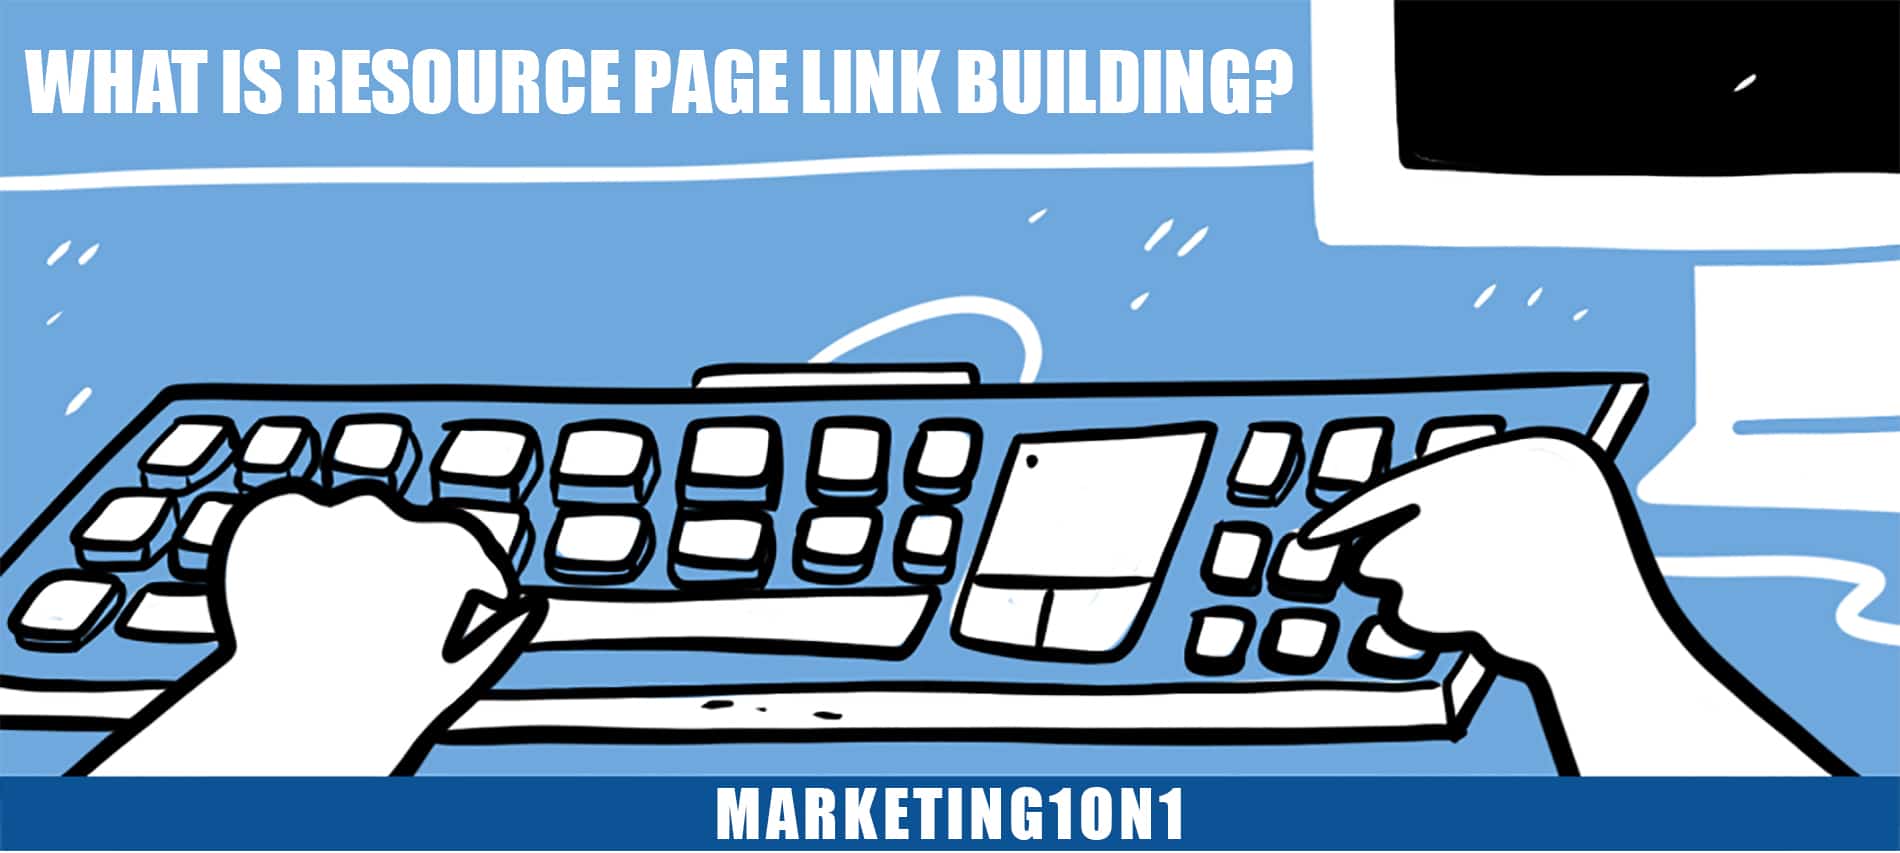 What is resource page link building?